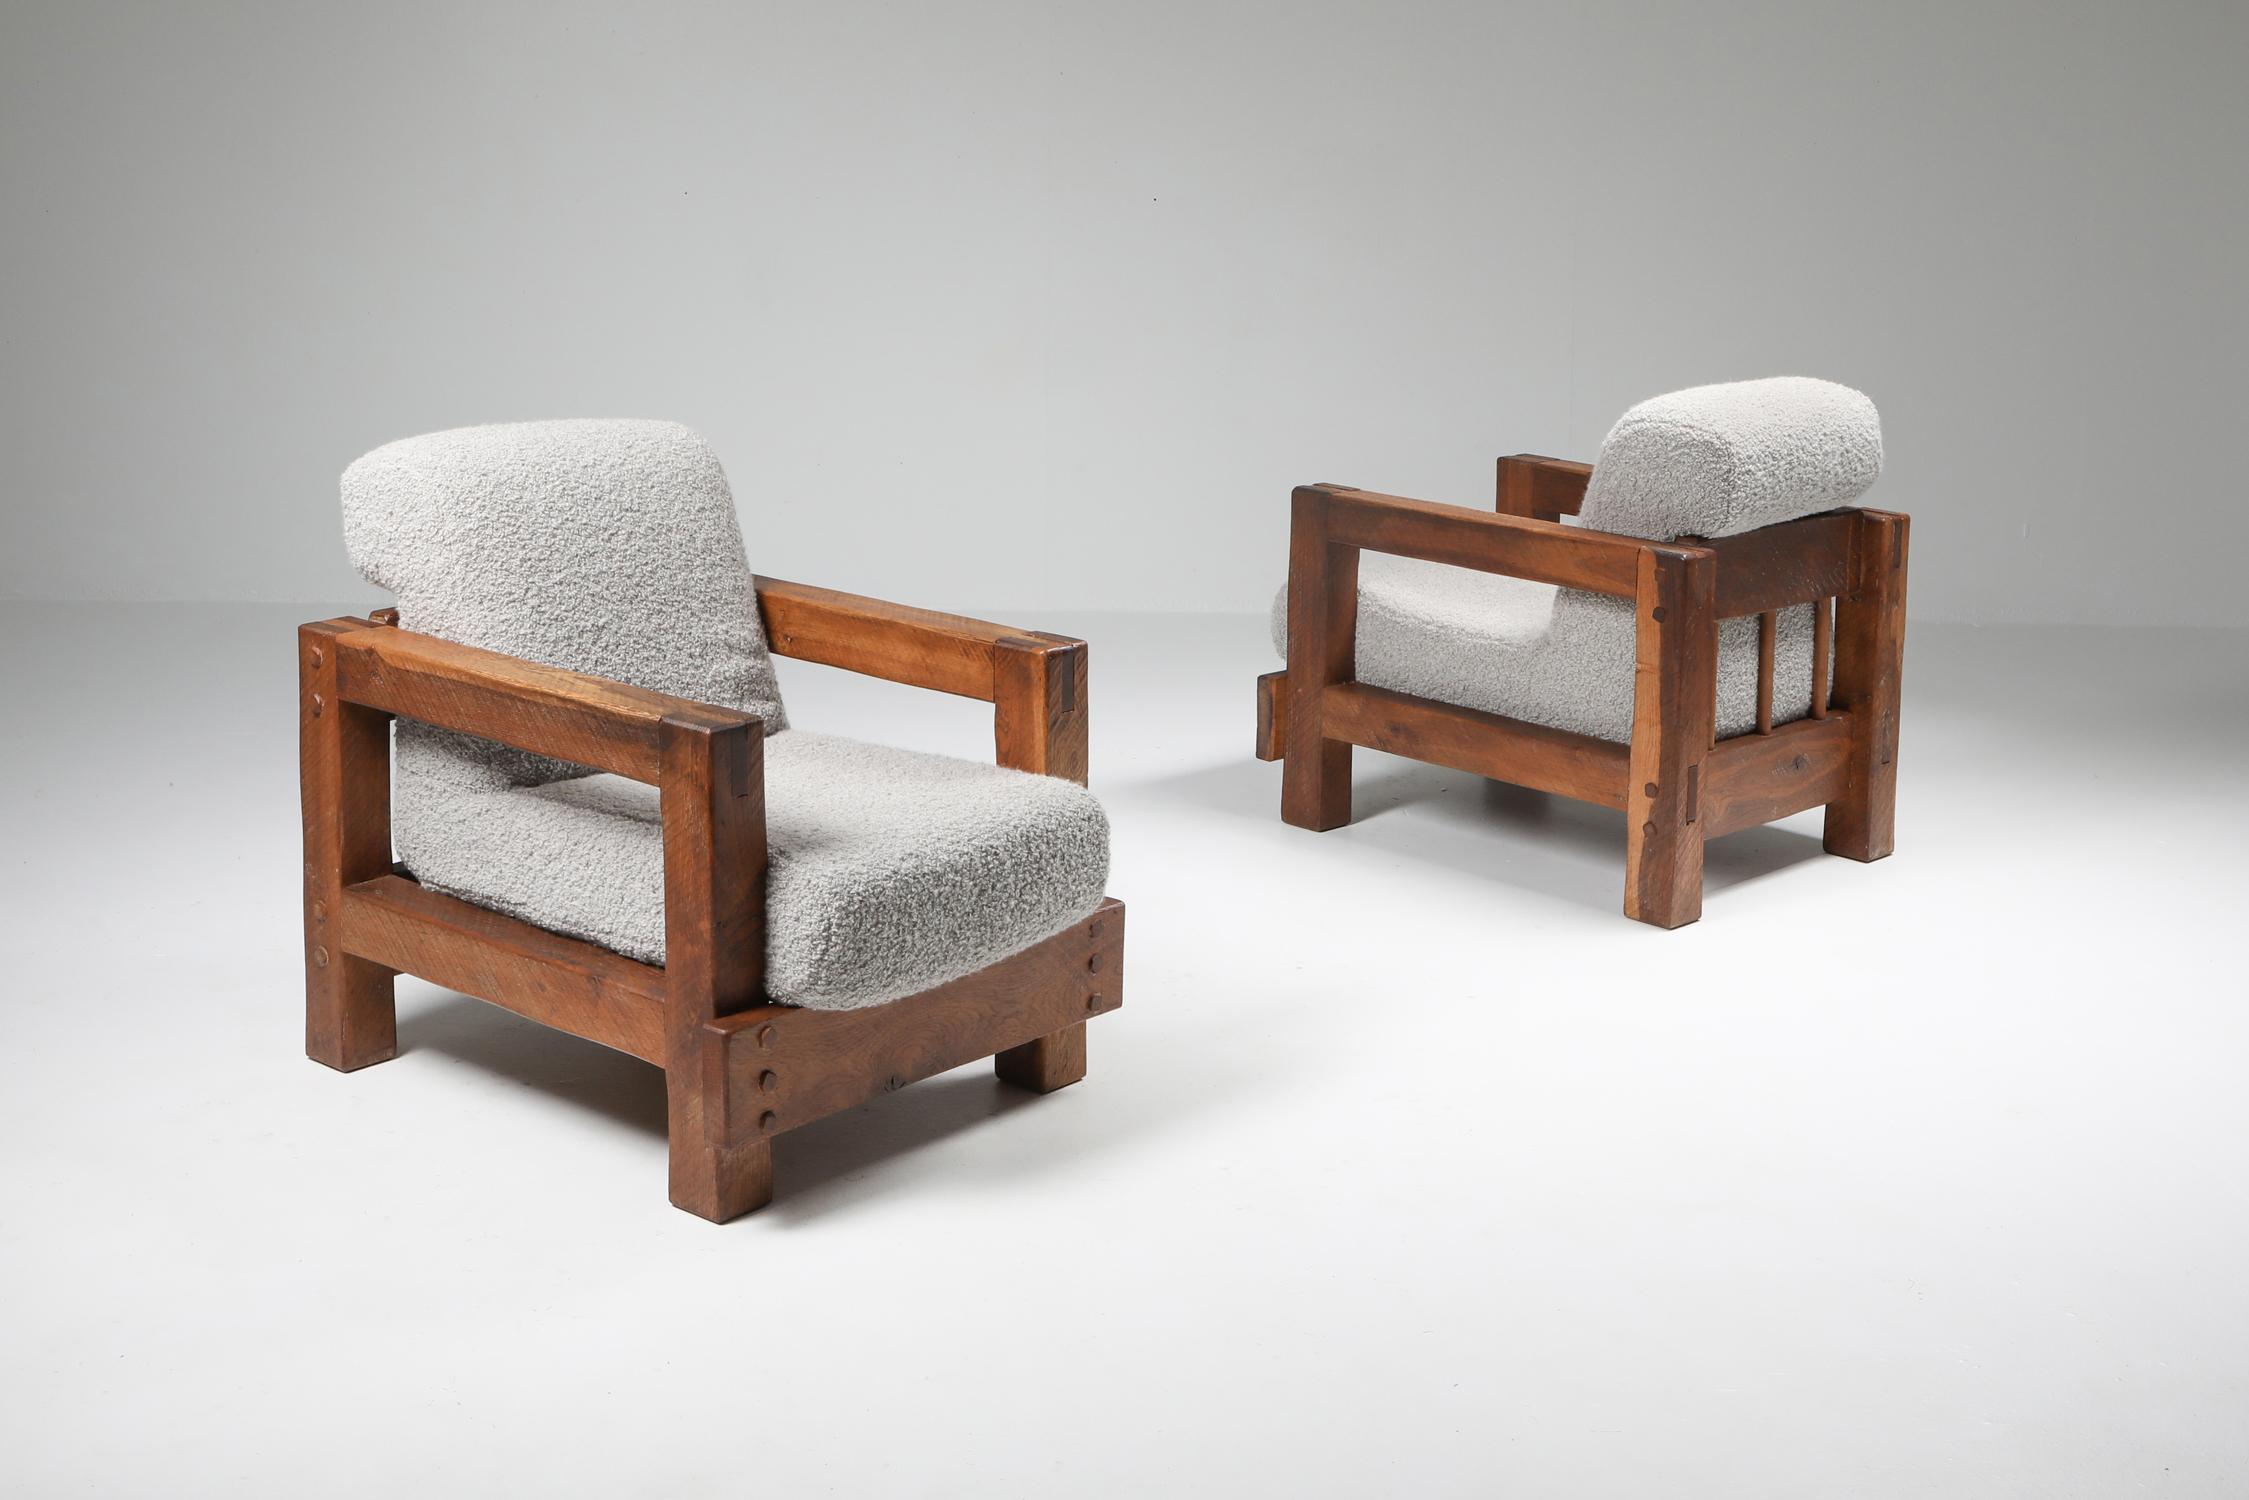 Rustic modern armchairs, bouclé wool, Pierre Frey

Chalet style wabi sabi lounge chairs in solid oak
Would fit well in an Axel Vervoordt inspired decor.



   